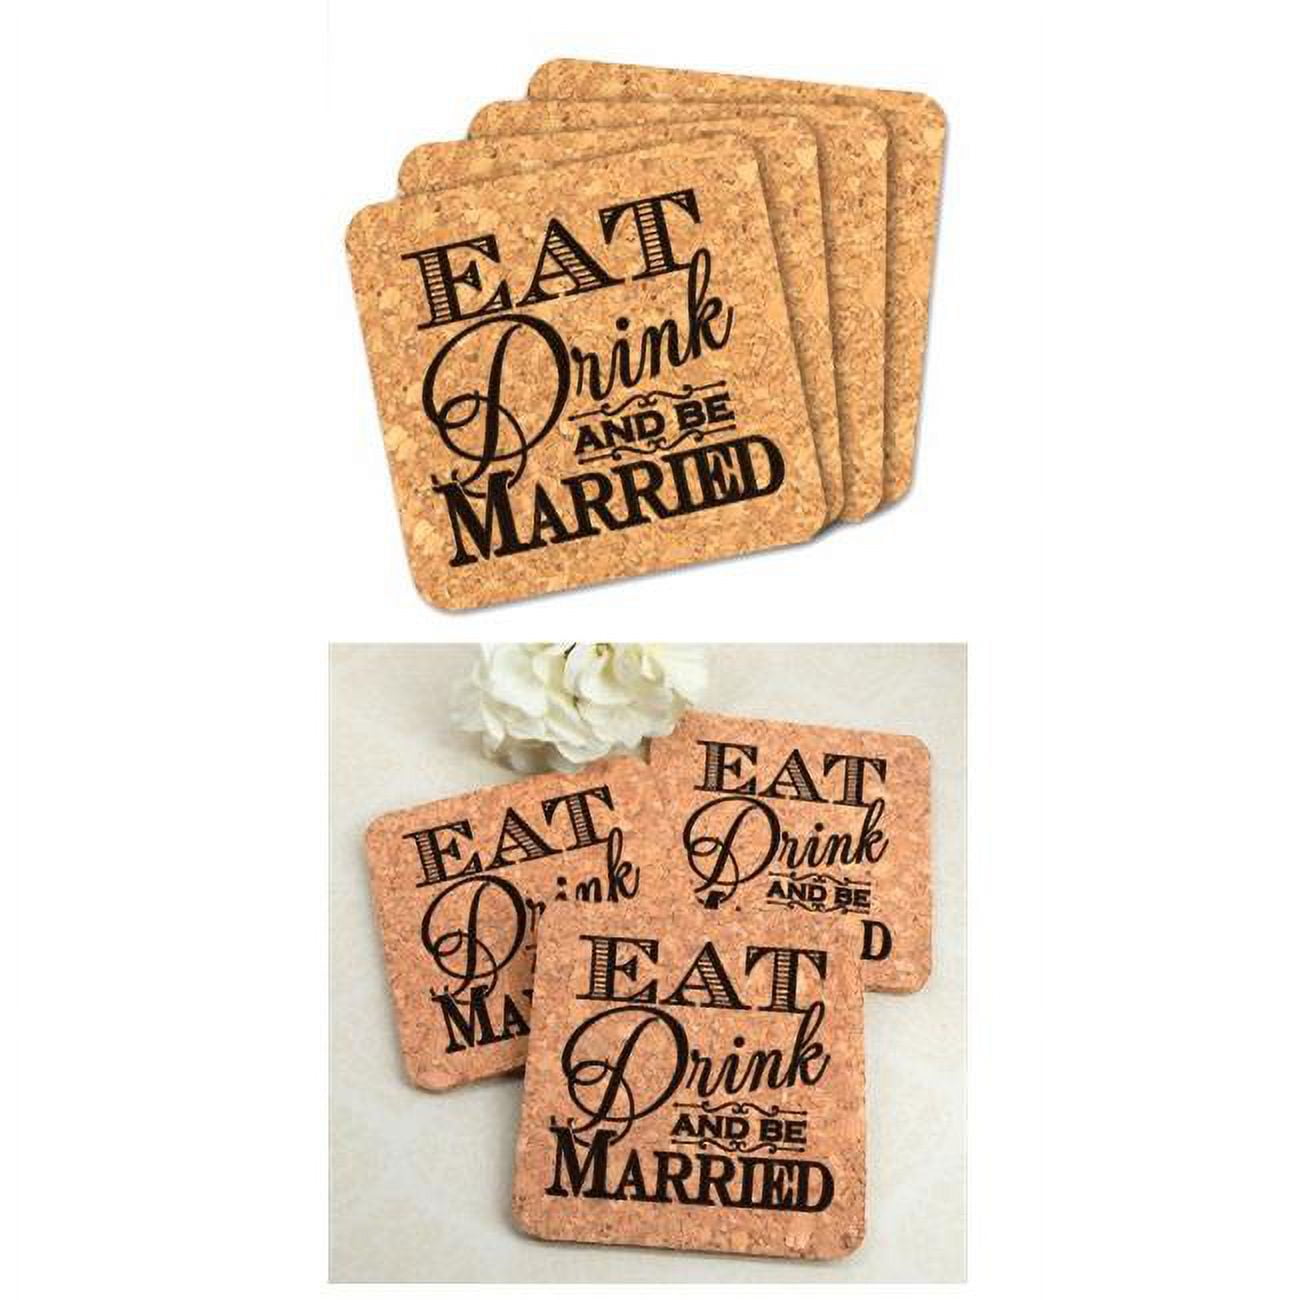 Picture of Ducky Days 8407181 4 x 4 in. Eat Drink & Be Married Square Cork Coaster Wedding Favors - Set of 4